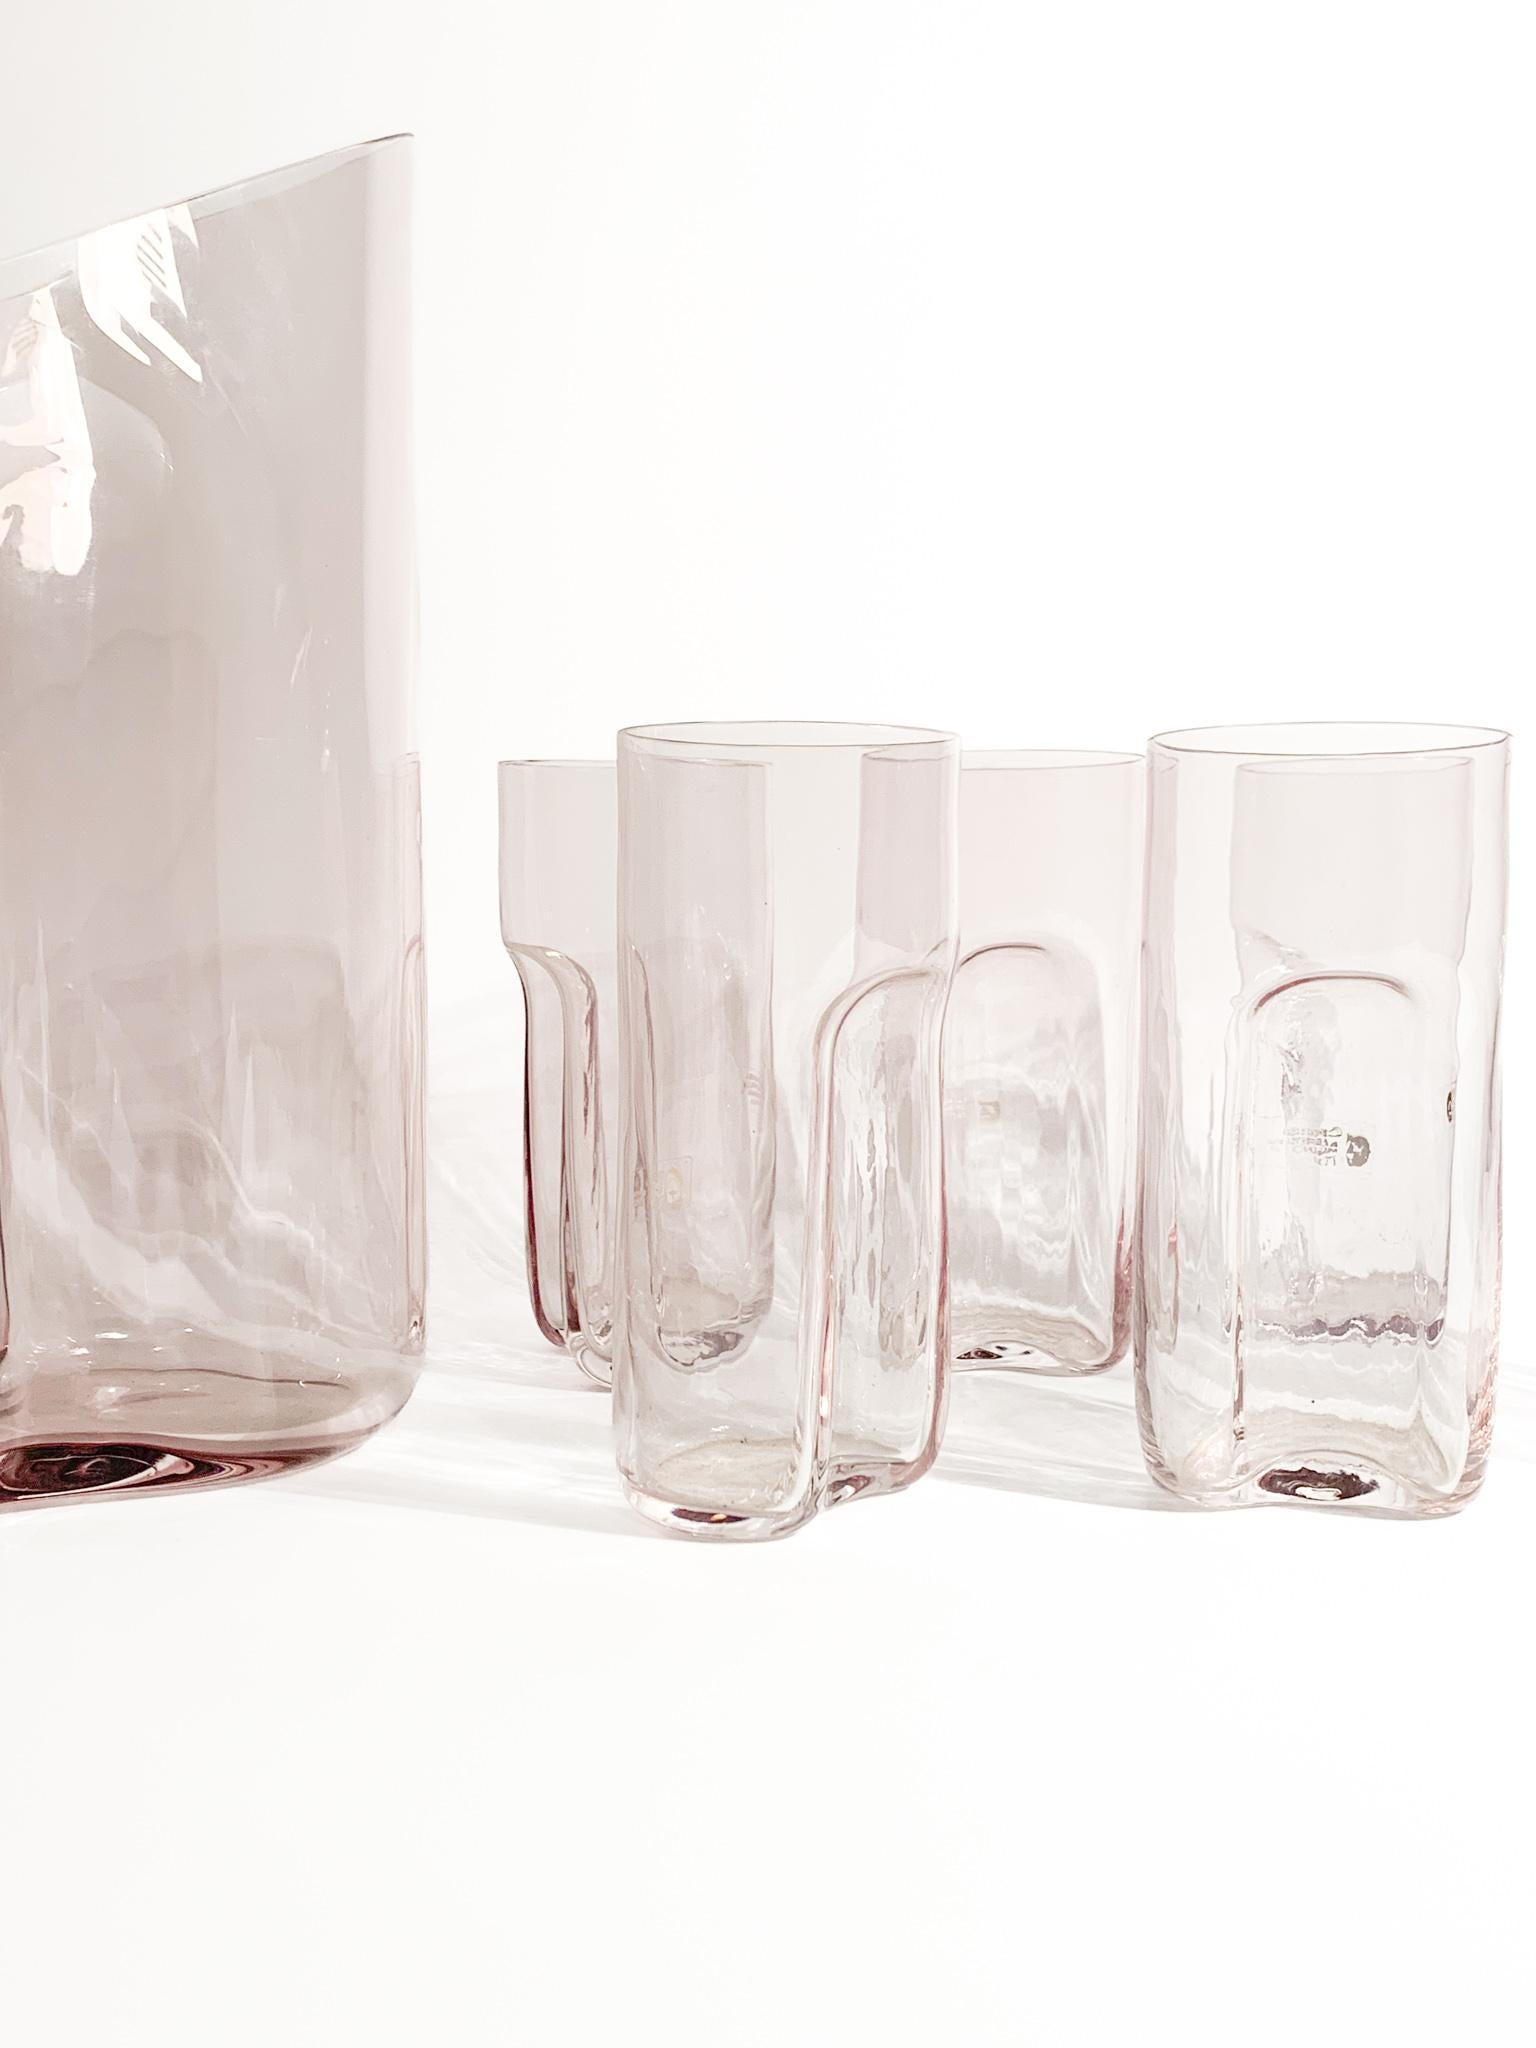 Set of Six Glasses and Carafe in Murano Glass by Cenedese and Albarelli 1970s For Sale 6